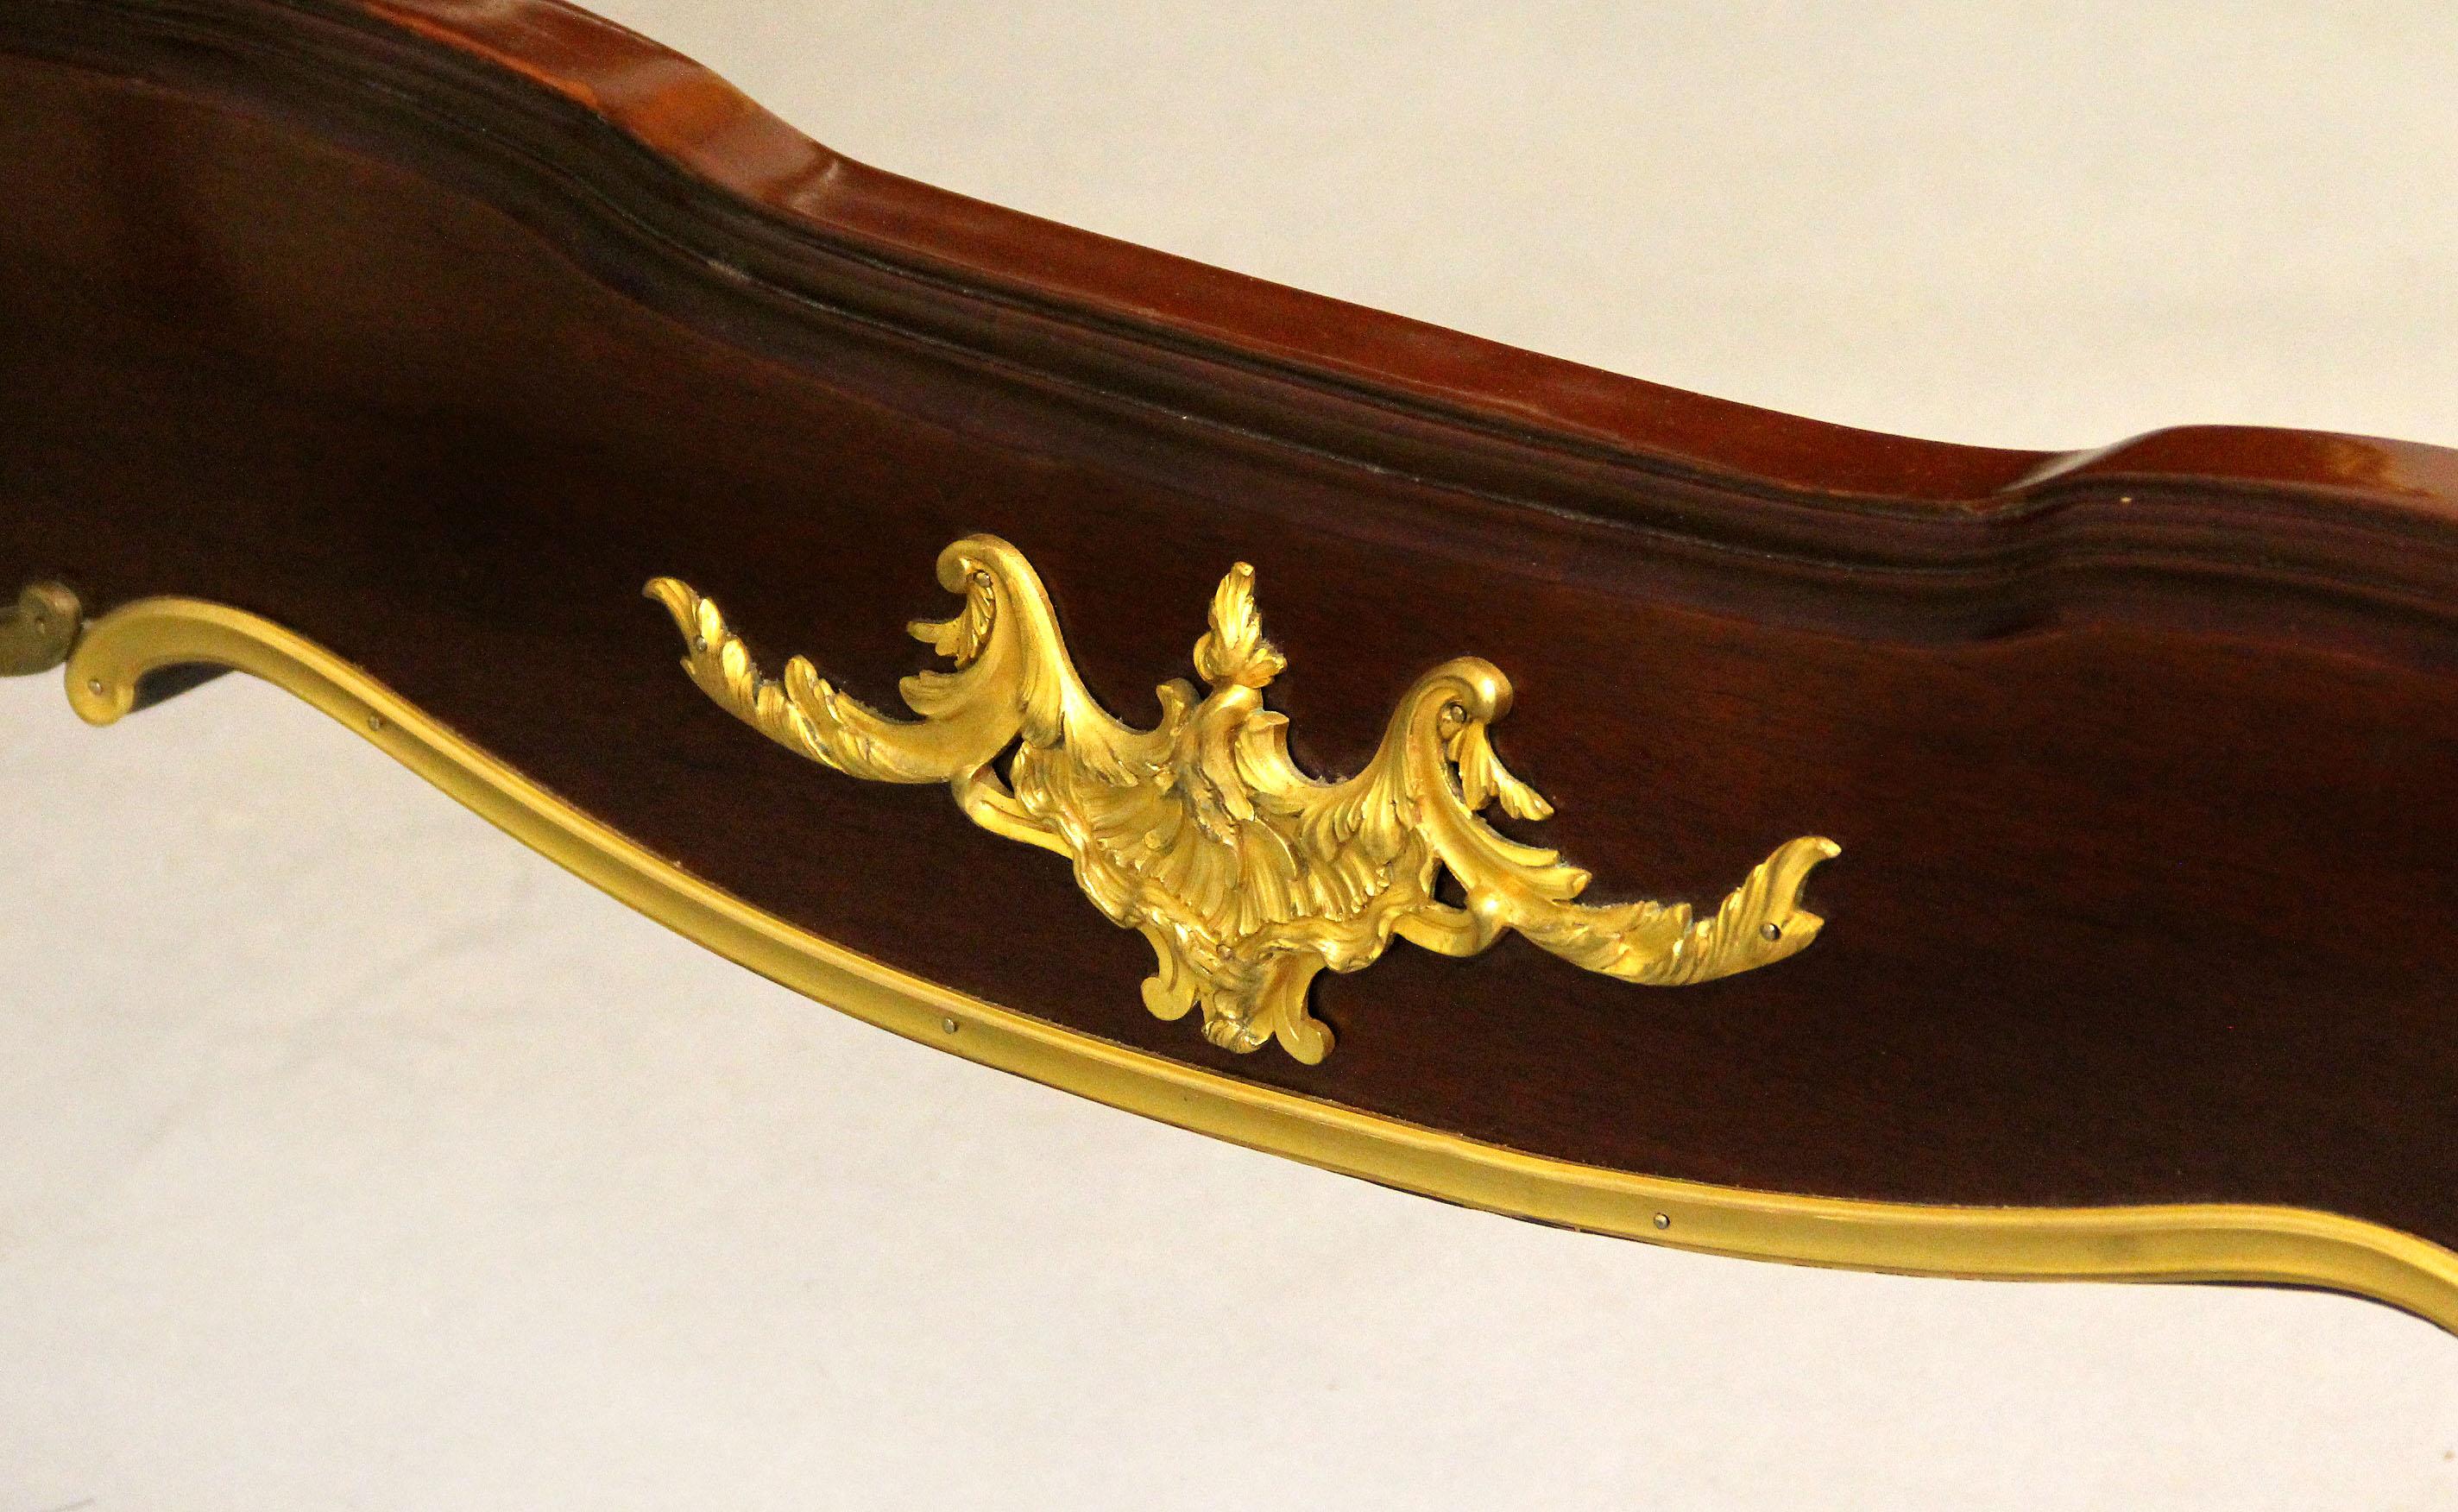 Wood Early 20th Century Gilt Bronze-Mounted Mahogany King Size Bed by François Linke For Sale